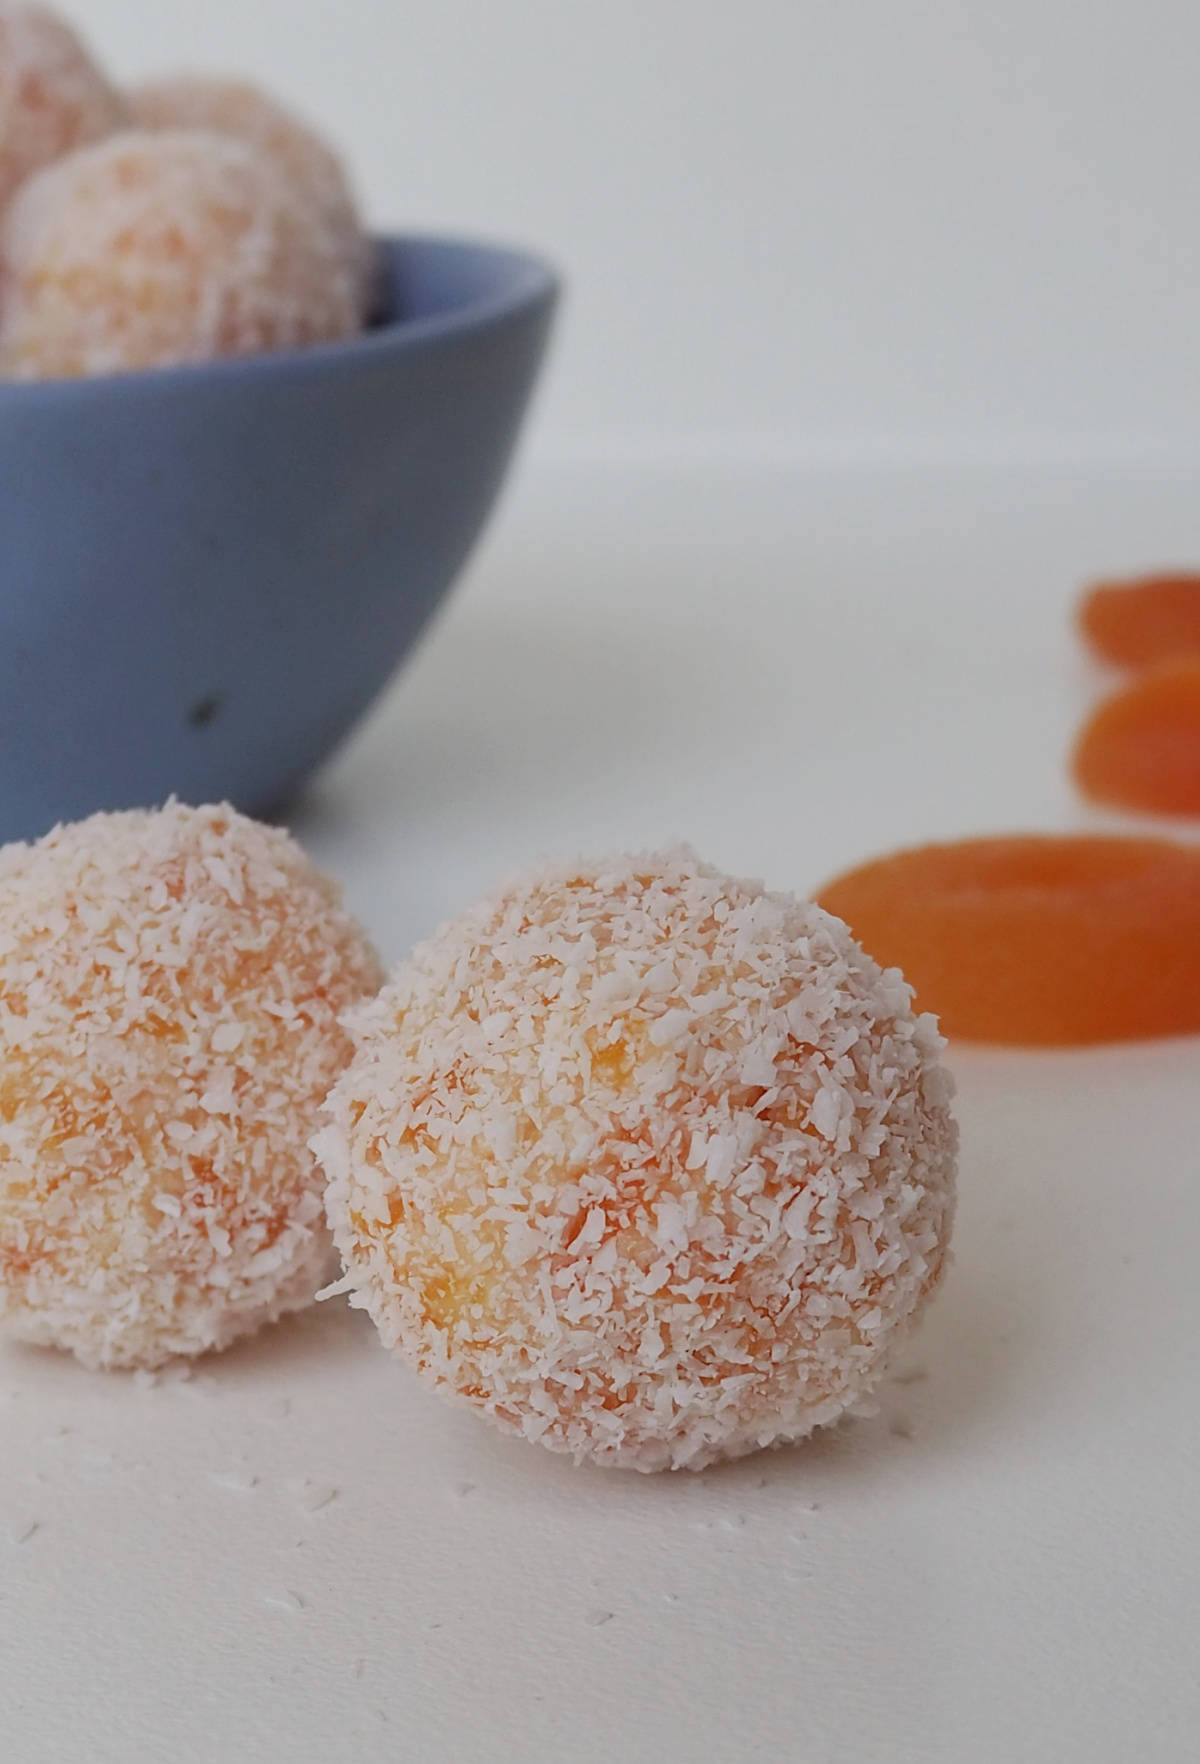 Close up of two apricot balls, behind them is more Apricot Balls sitting in a blue dish.